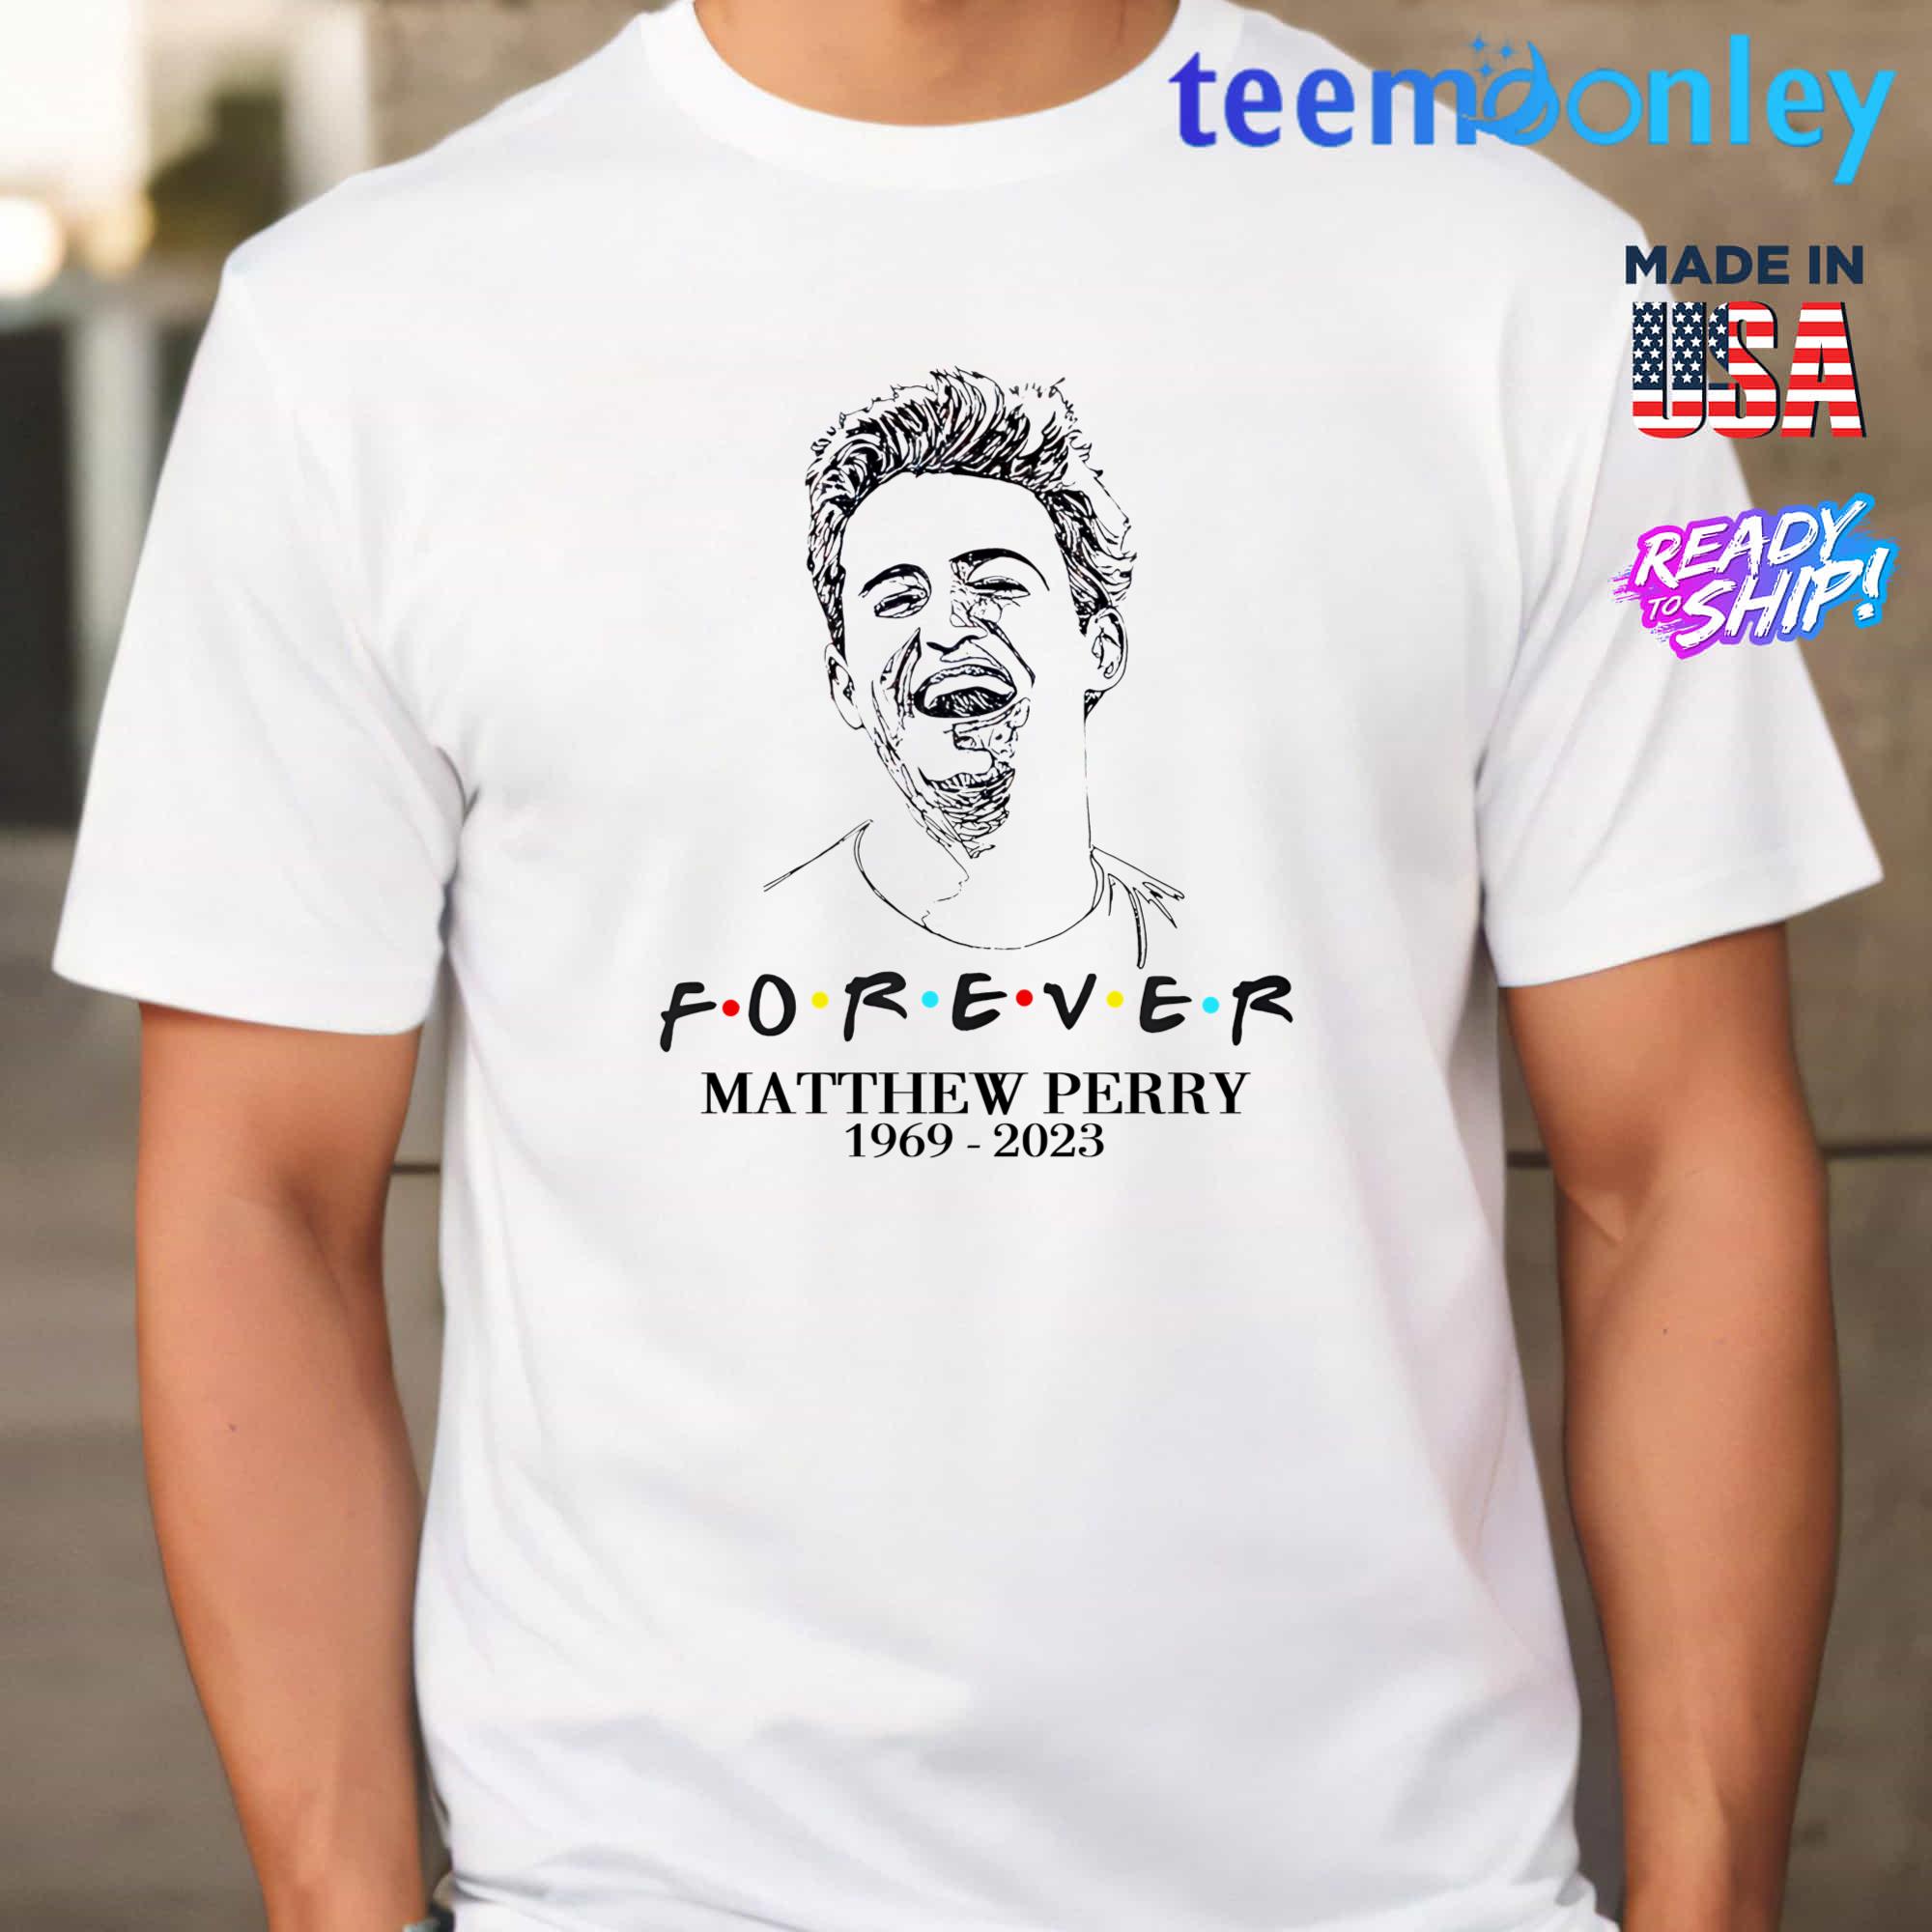 In Loving Memory 1969–2023 Matthew Perry Gone But Never Forgotten Shirt